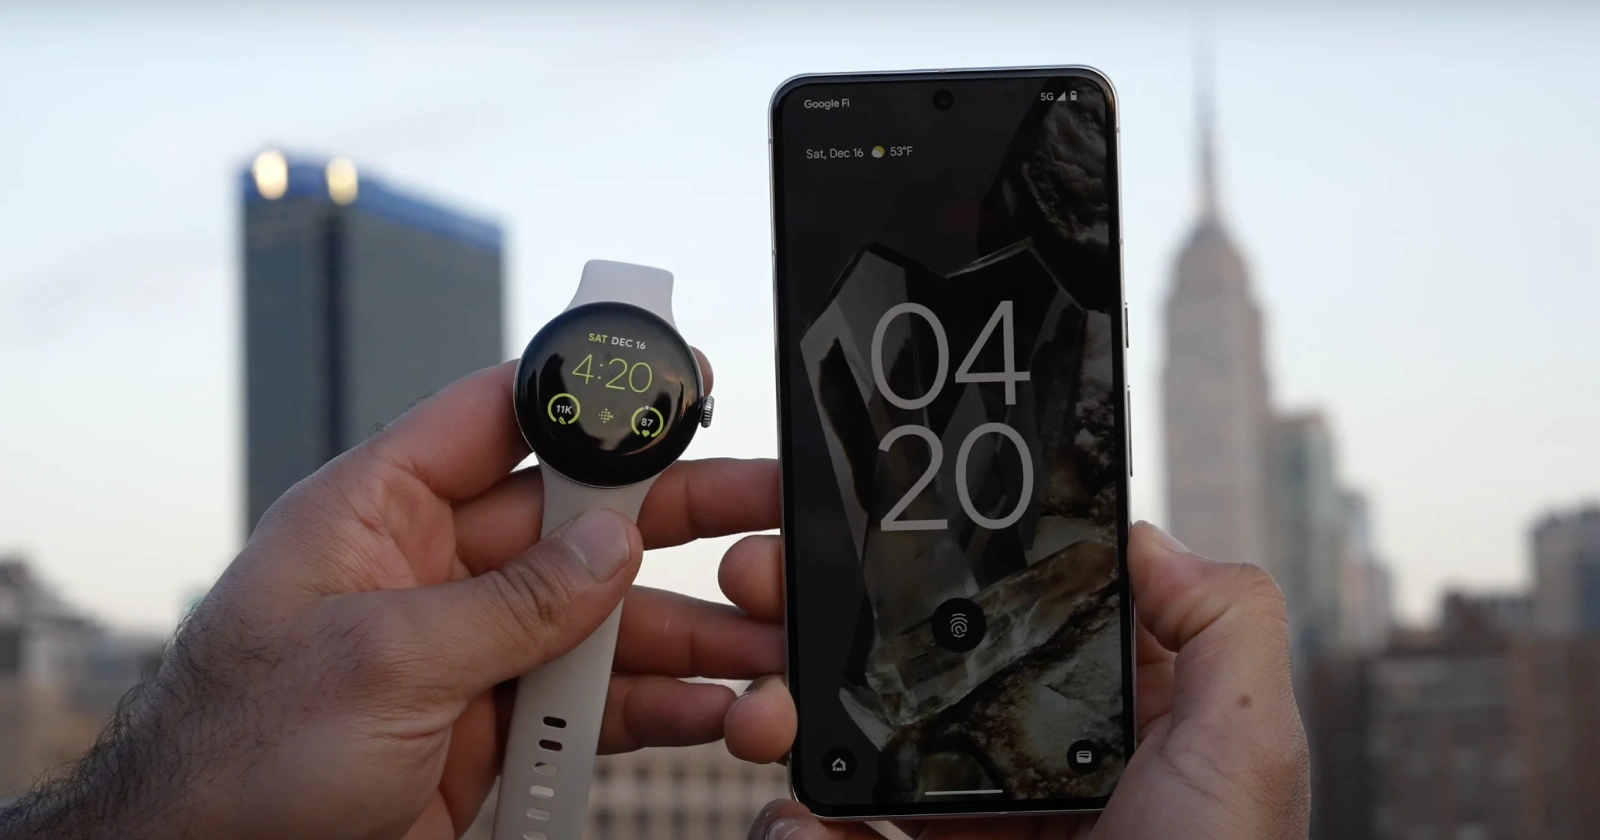 Shervin Shares collaborates with Google to show off Pixel 8 Pro & Pixel Watch 2 features in 